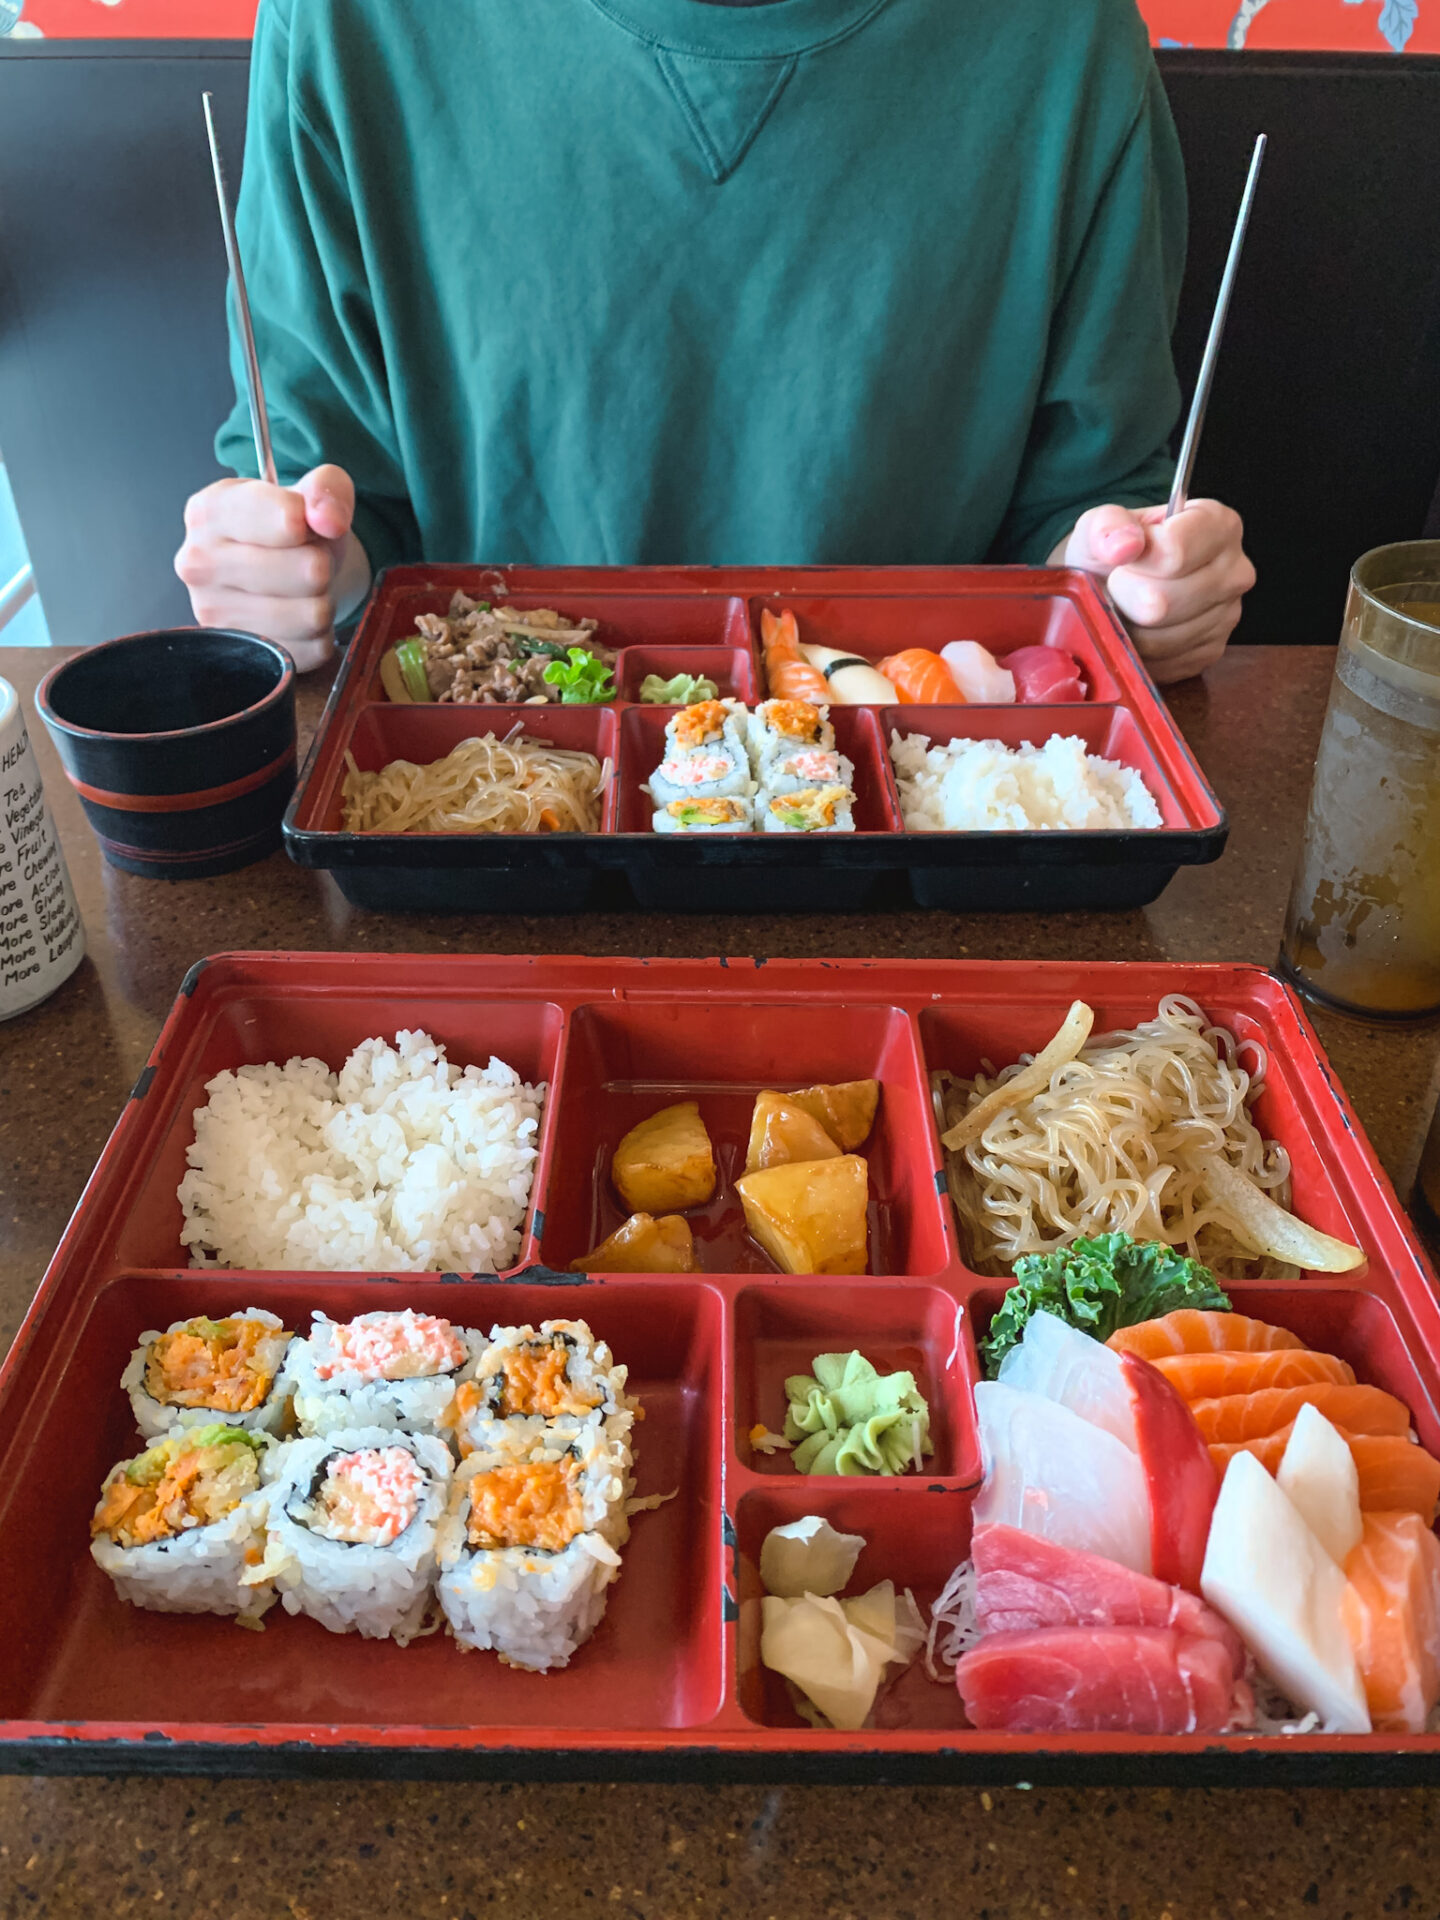 Lunch bento boxes from Gal's Sushi in Markham, Ontario